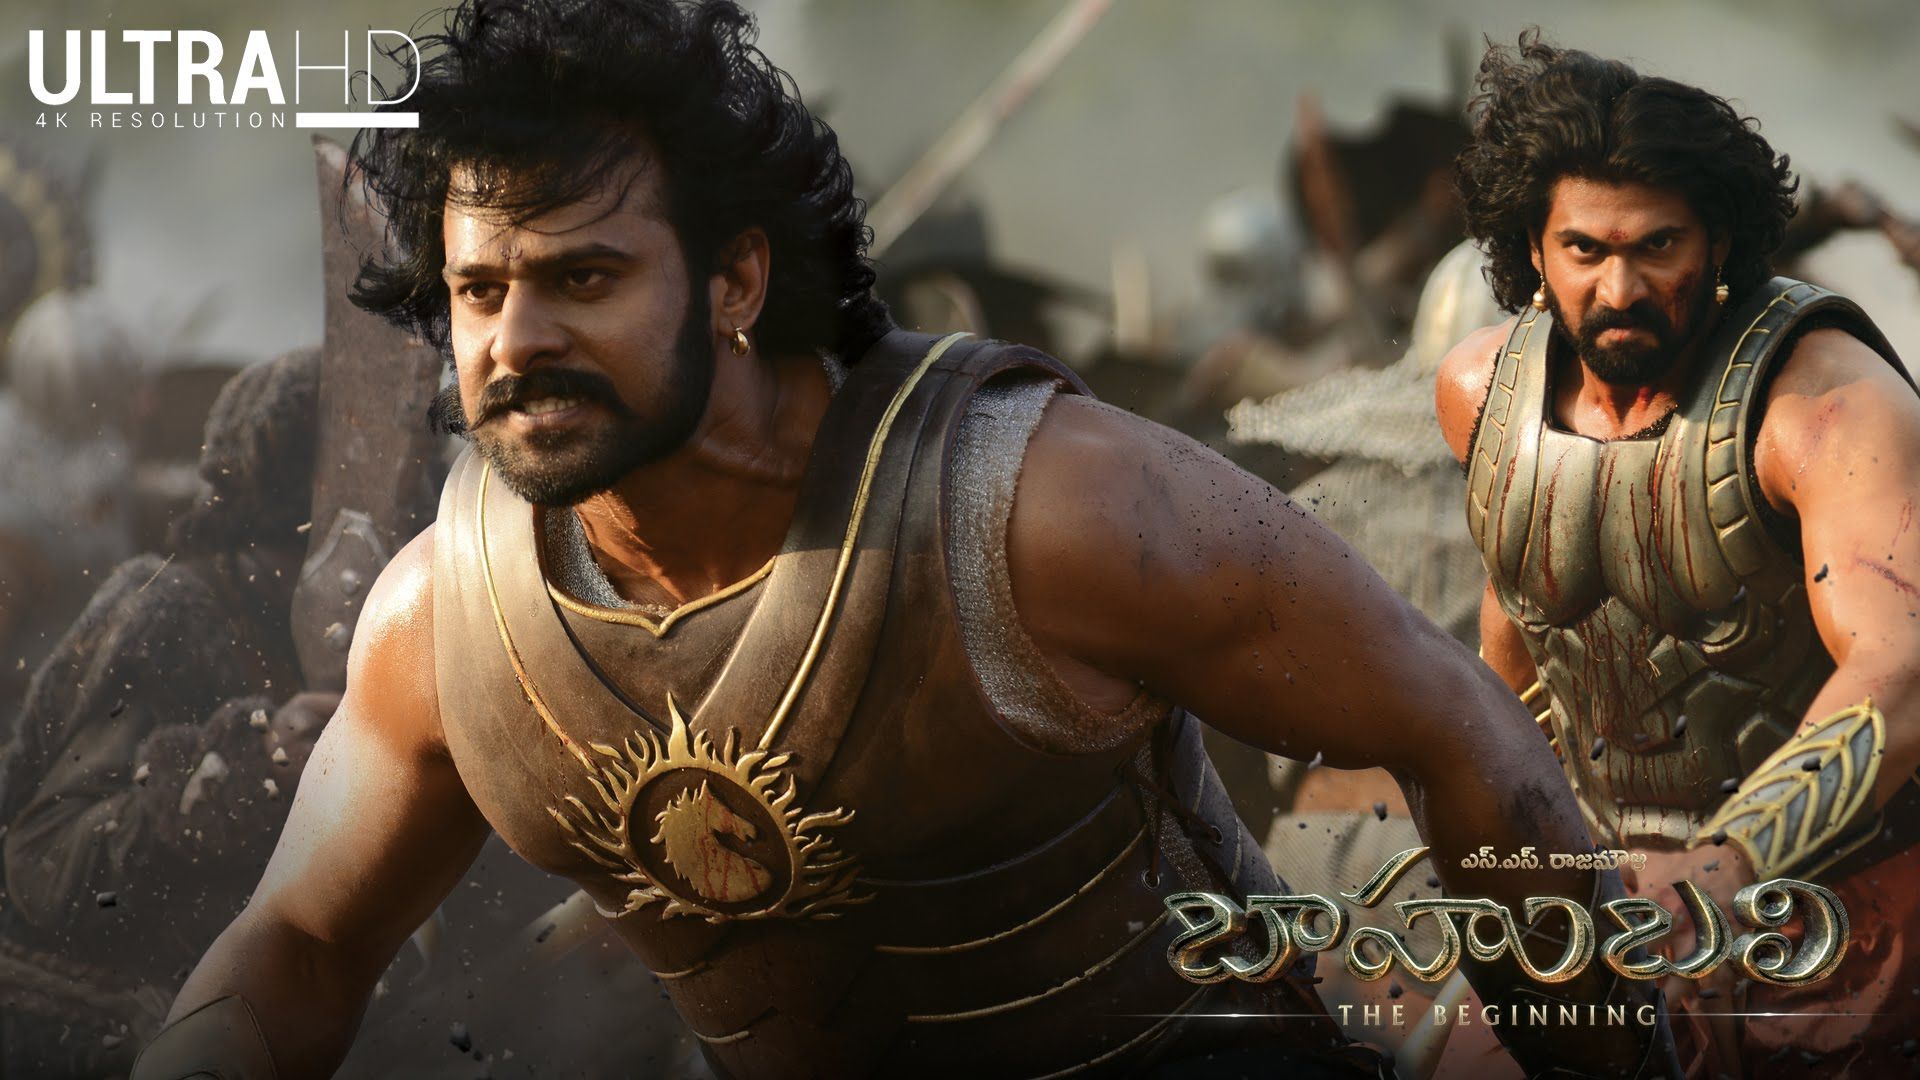 Prabhas Baahubali  The Conclusion Movie Wallpapers Ultra HD Posters   25CineFrames